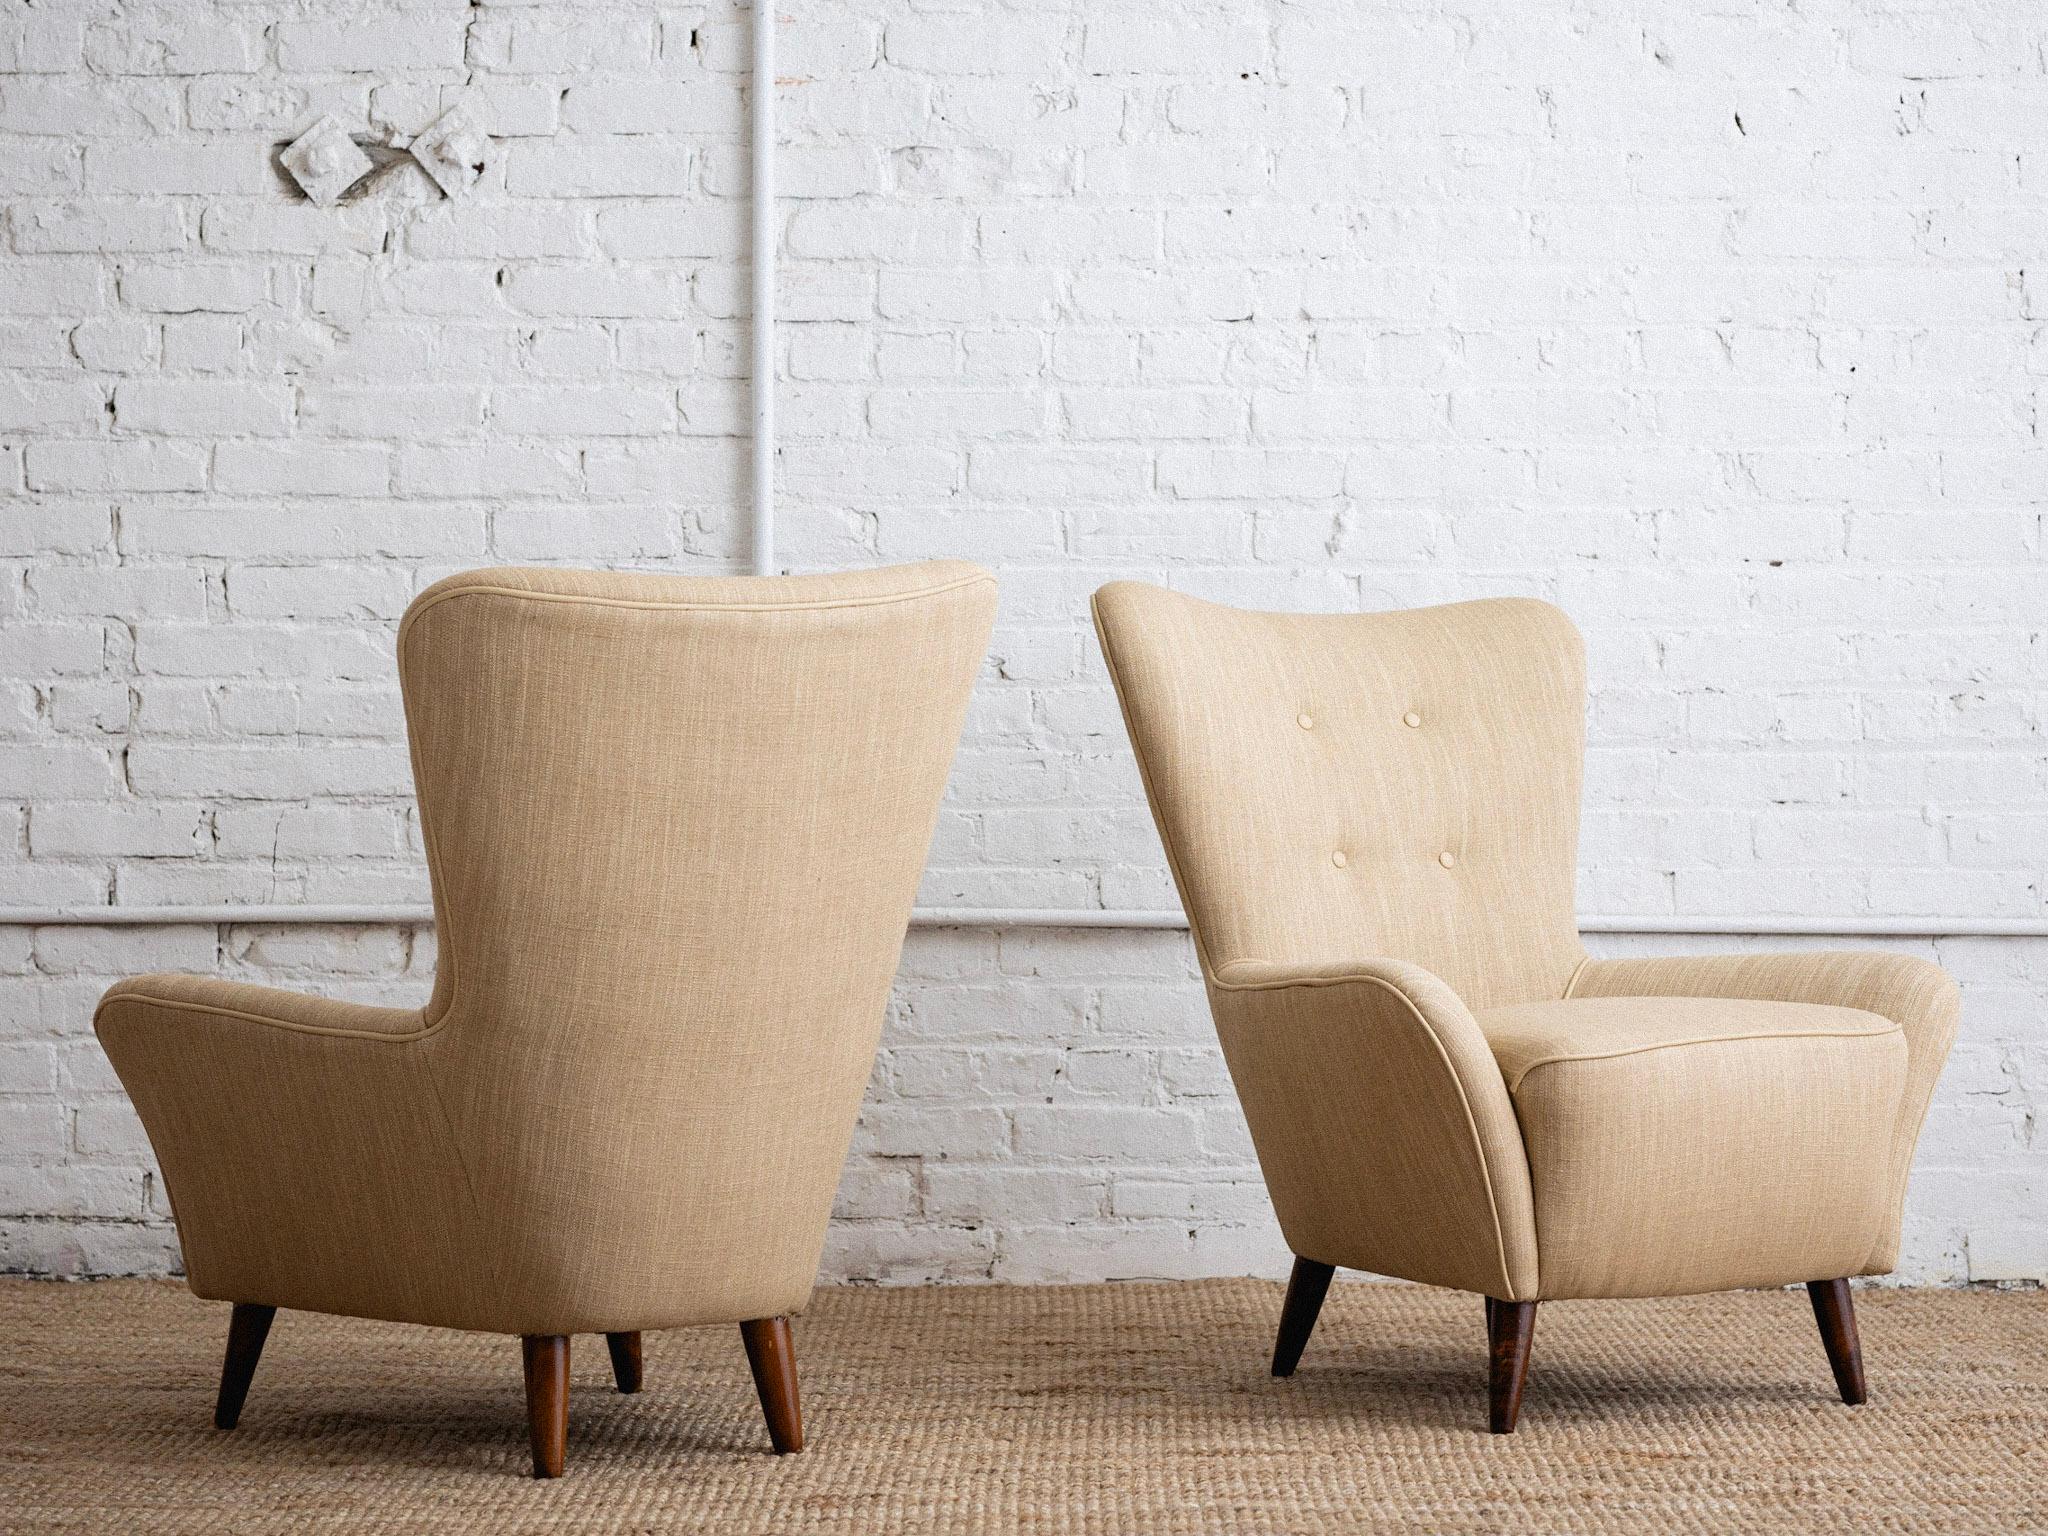 20th Century Petite Italian Armchairs in Linen and Leather - a Pair For Sale